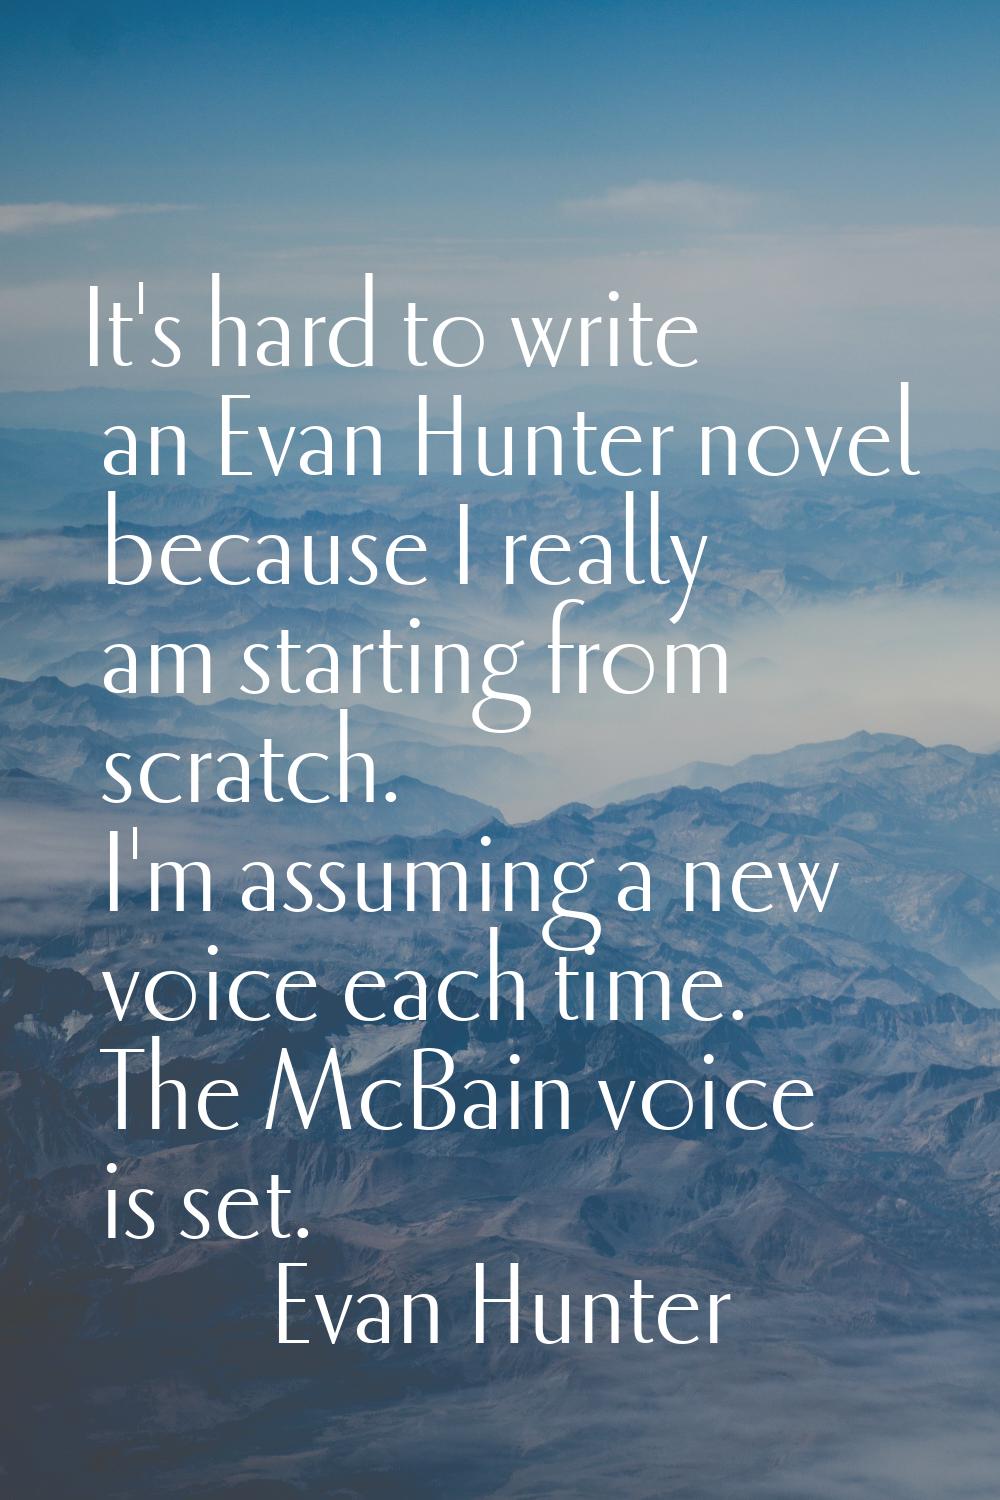 It's hard to write an Evan Hunter novel because I really am starting from scratch. I'm assuming a n